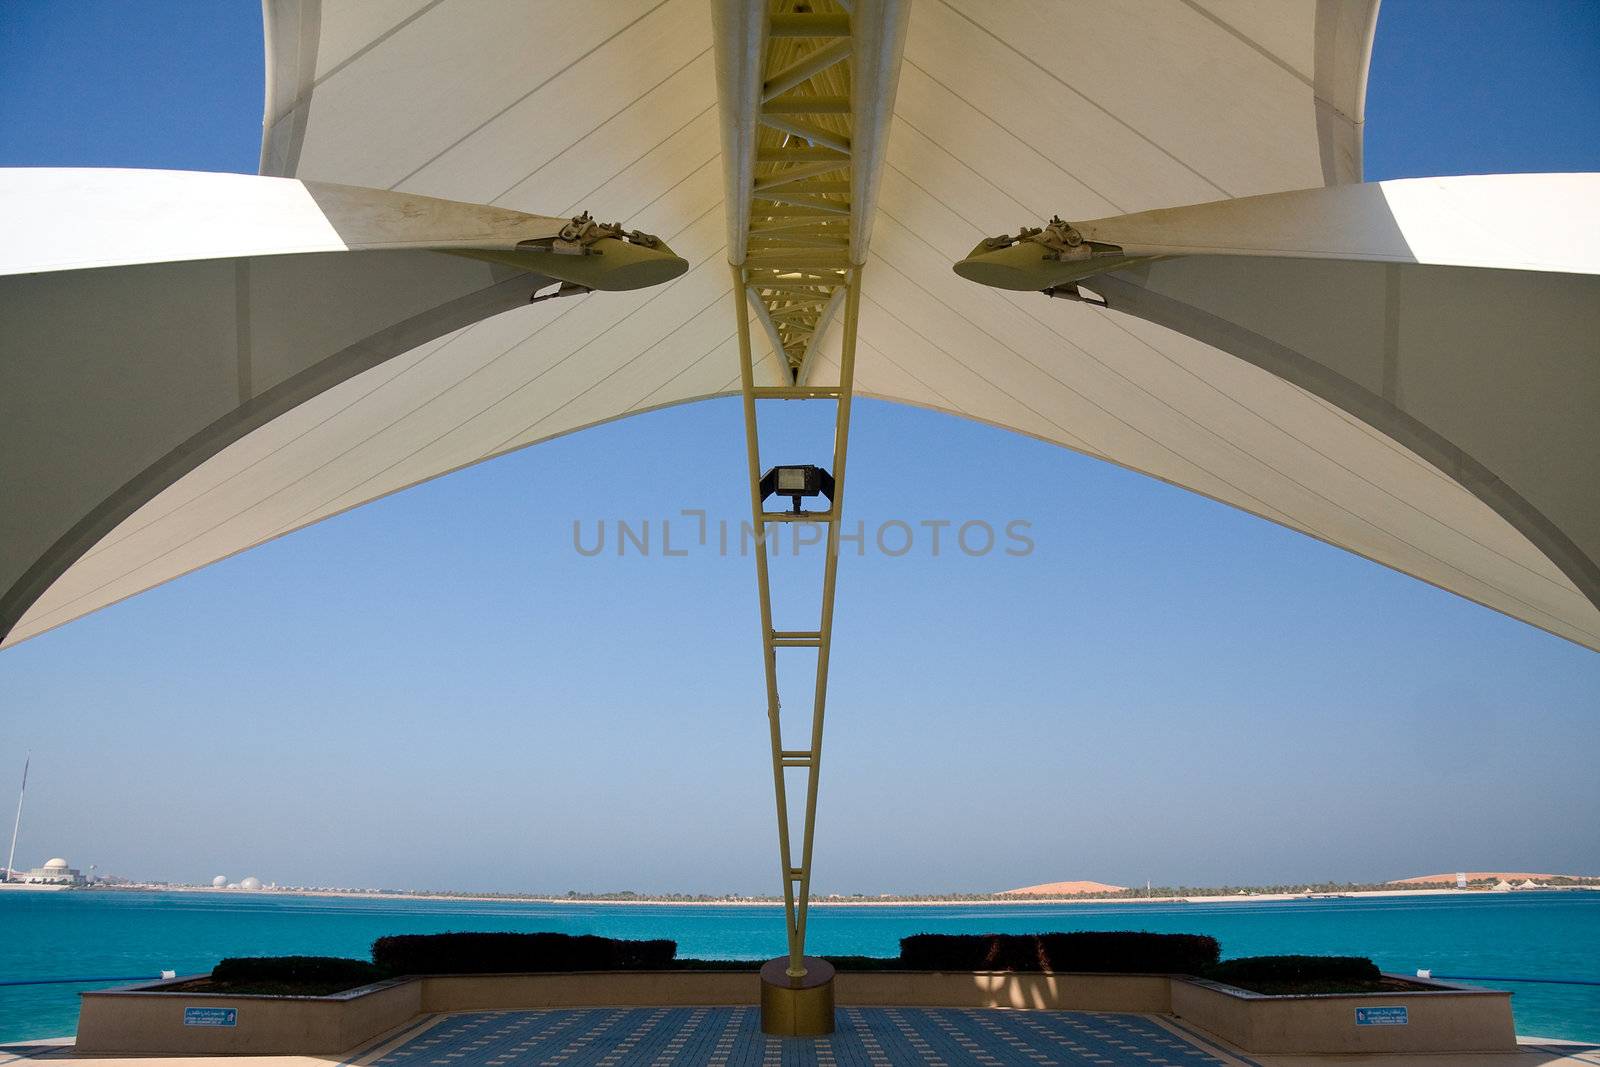 Modern sail like construction providing shade and framing a view of gulf and distant sand dunes